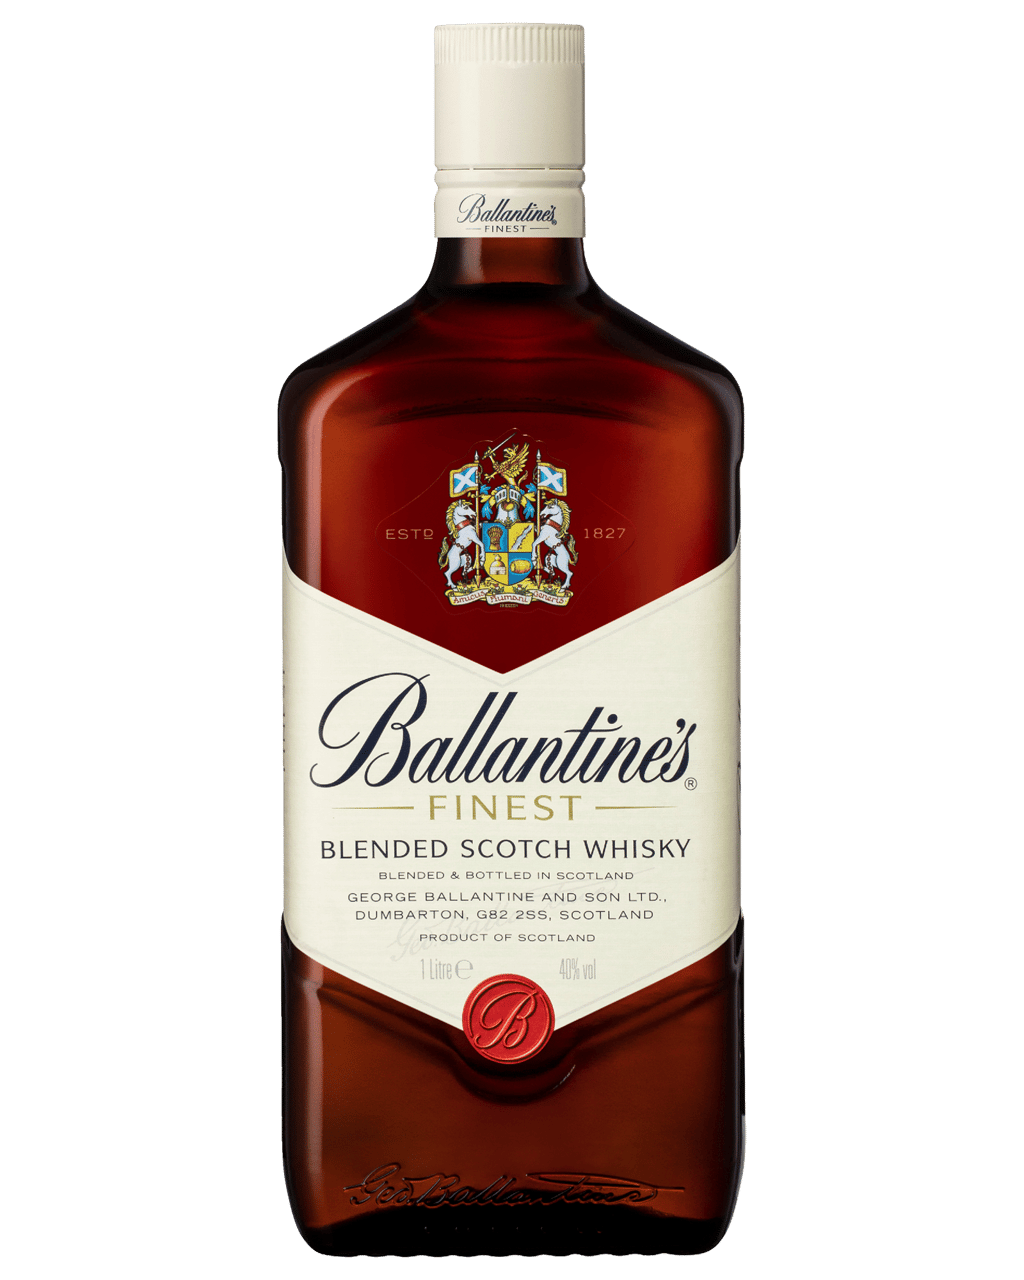 Ballantines Scotch Whisky 30 Year Old Bottled 1990s